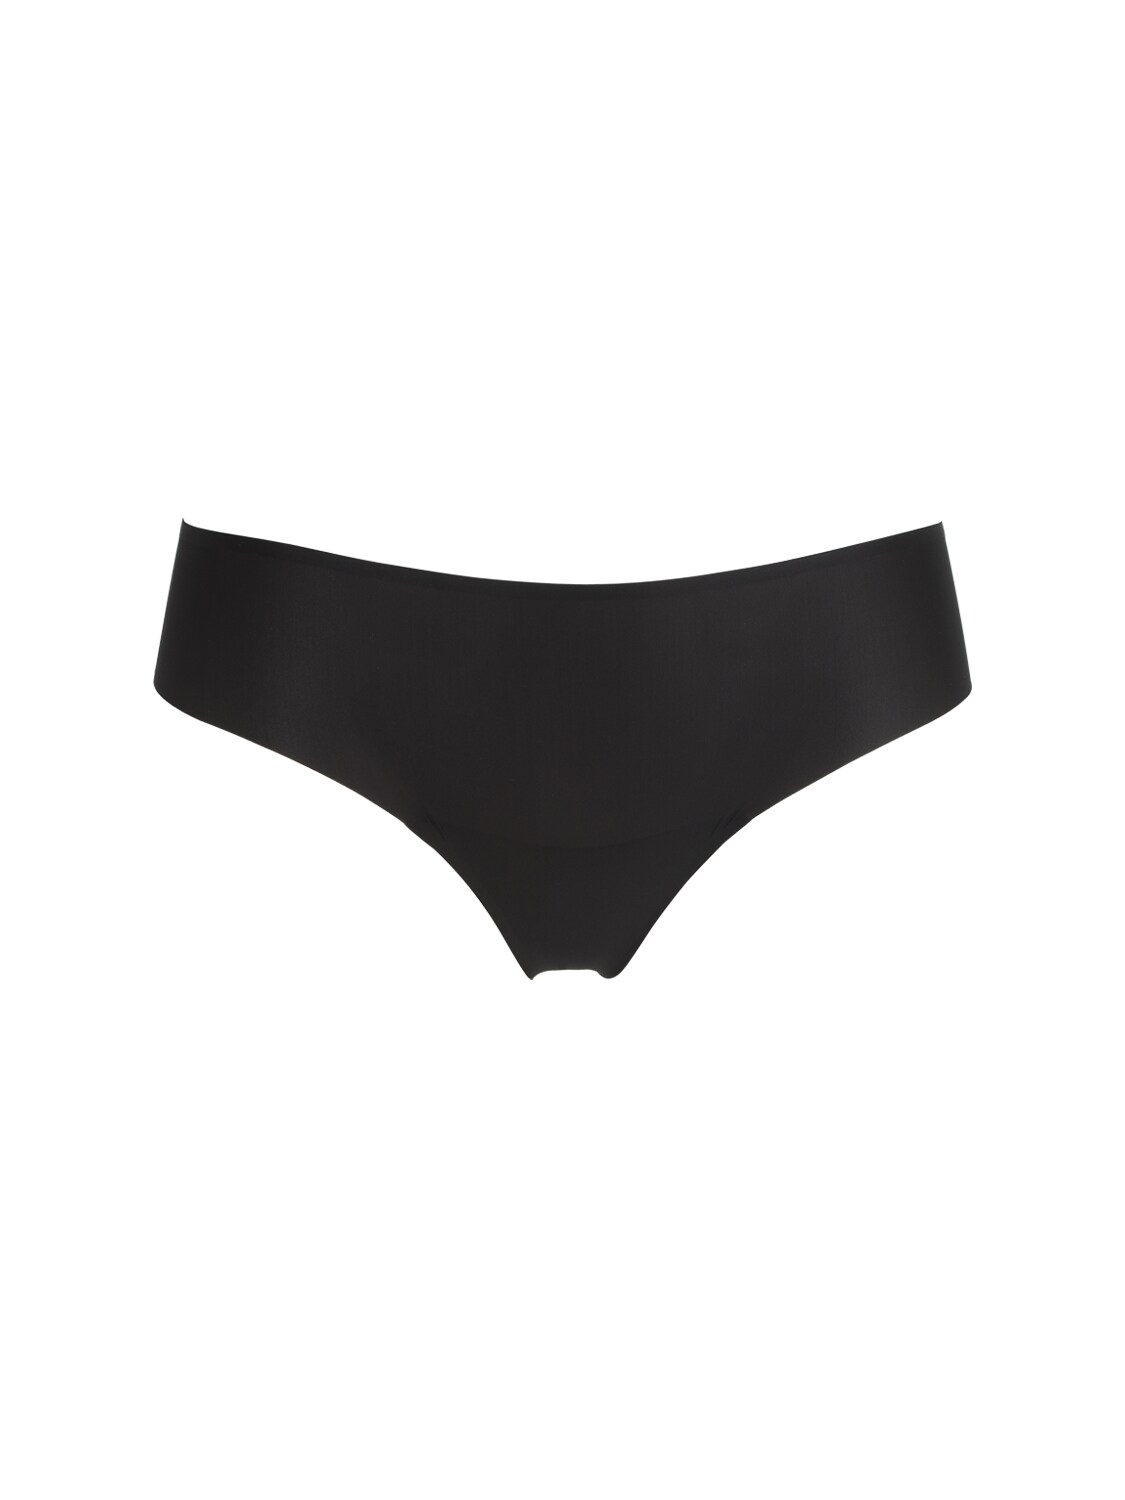 WOLFORD SKIN STRETCH TECH THONG,71IVOP032-NZAWNQ2